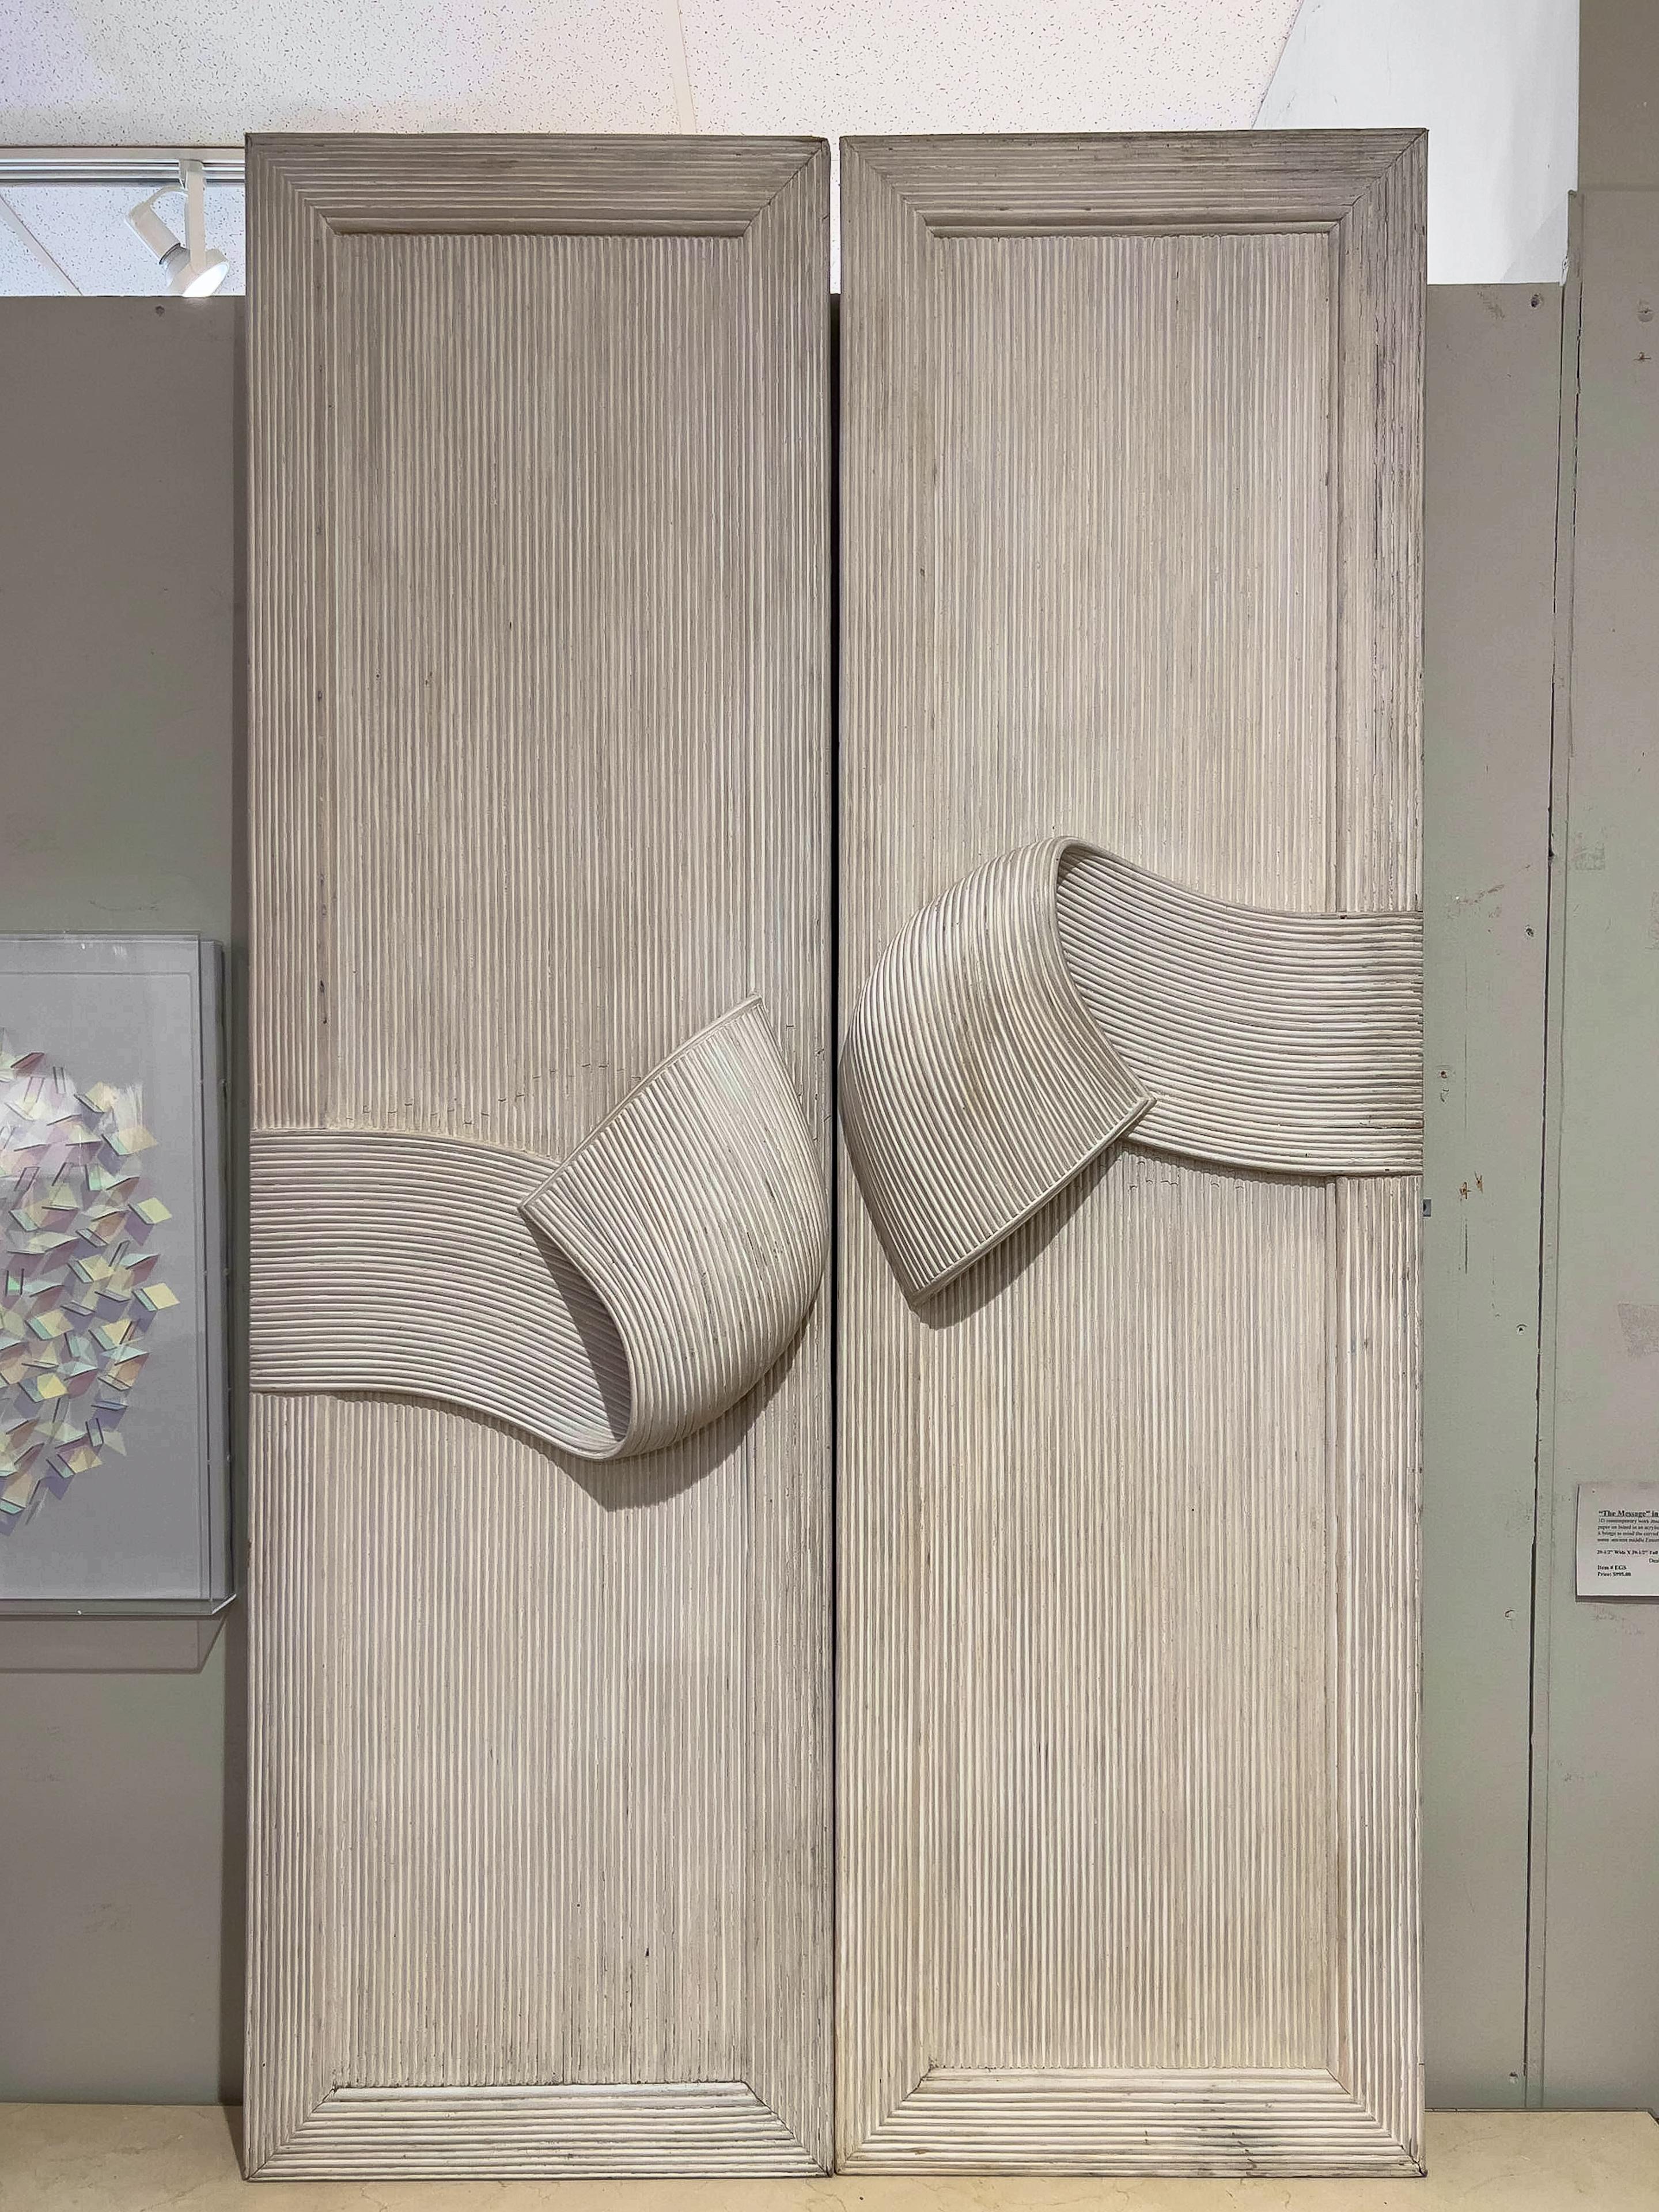 Pair of hand made doors from the “Scultura